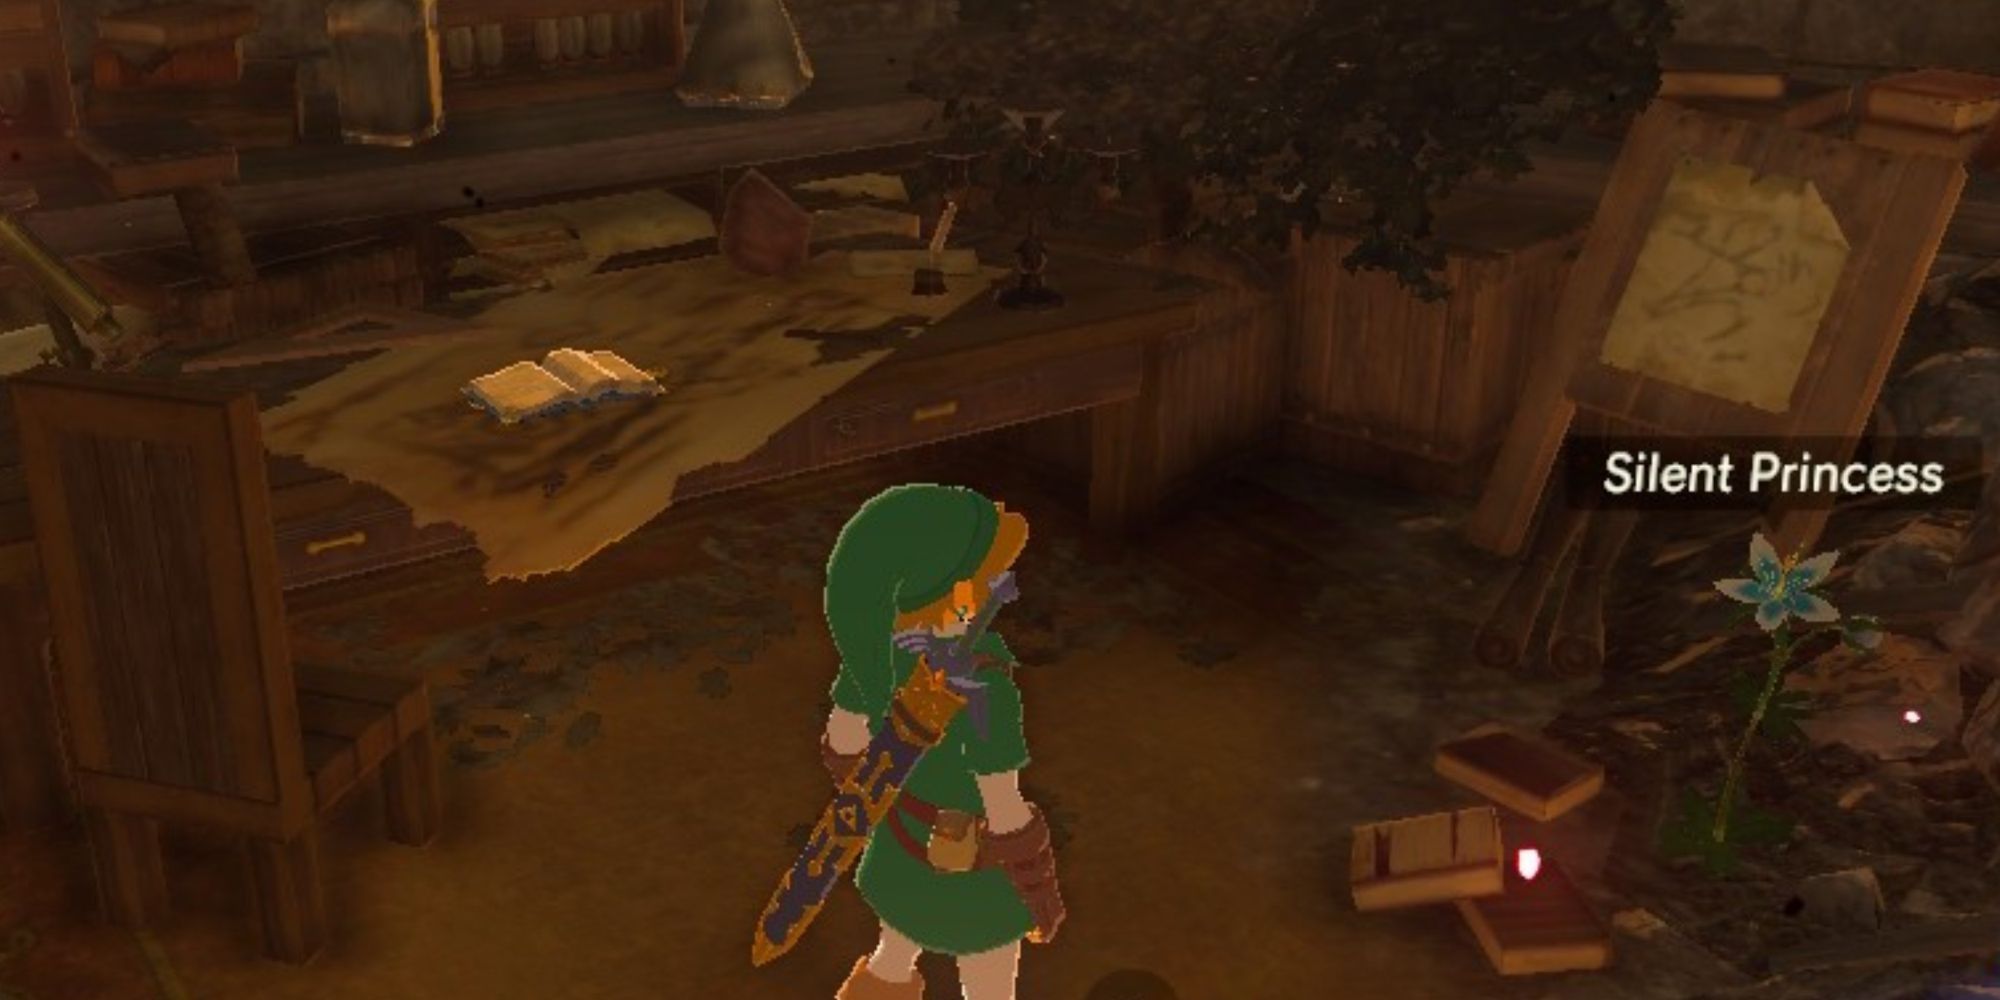 Link looking at the Silent Princess in Zelda's Study